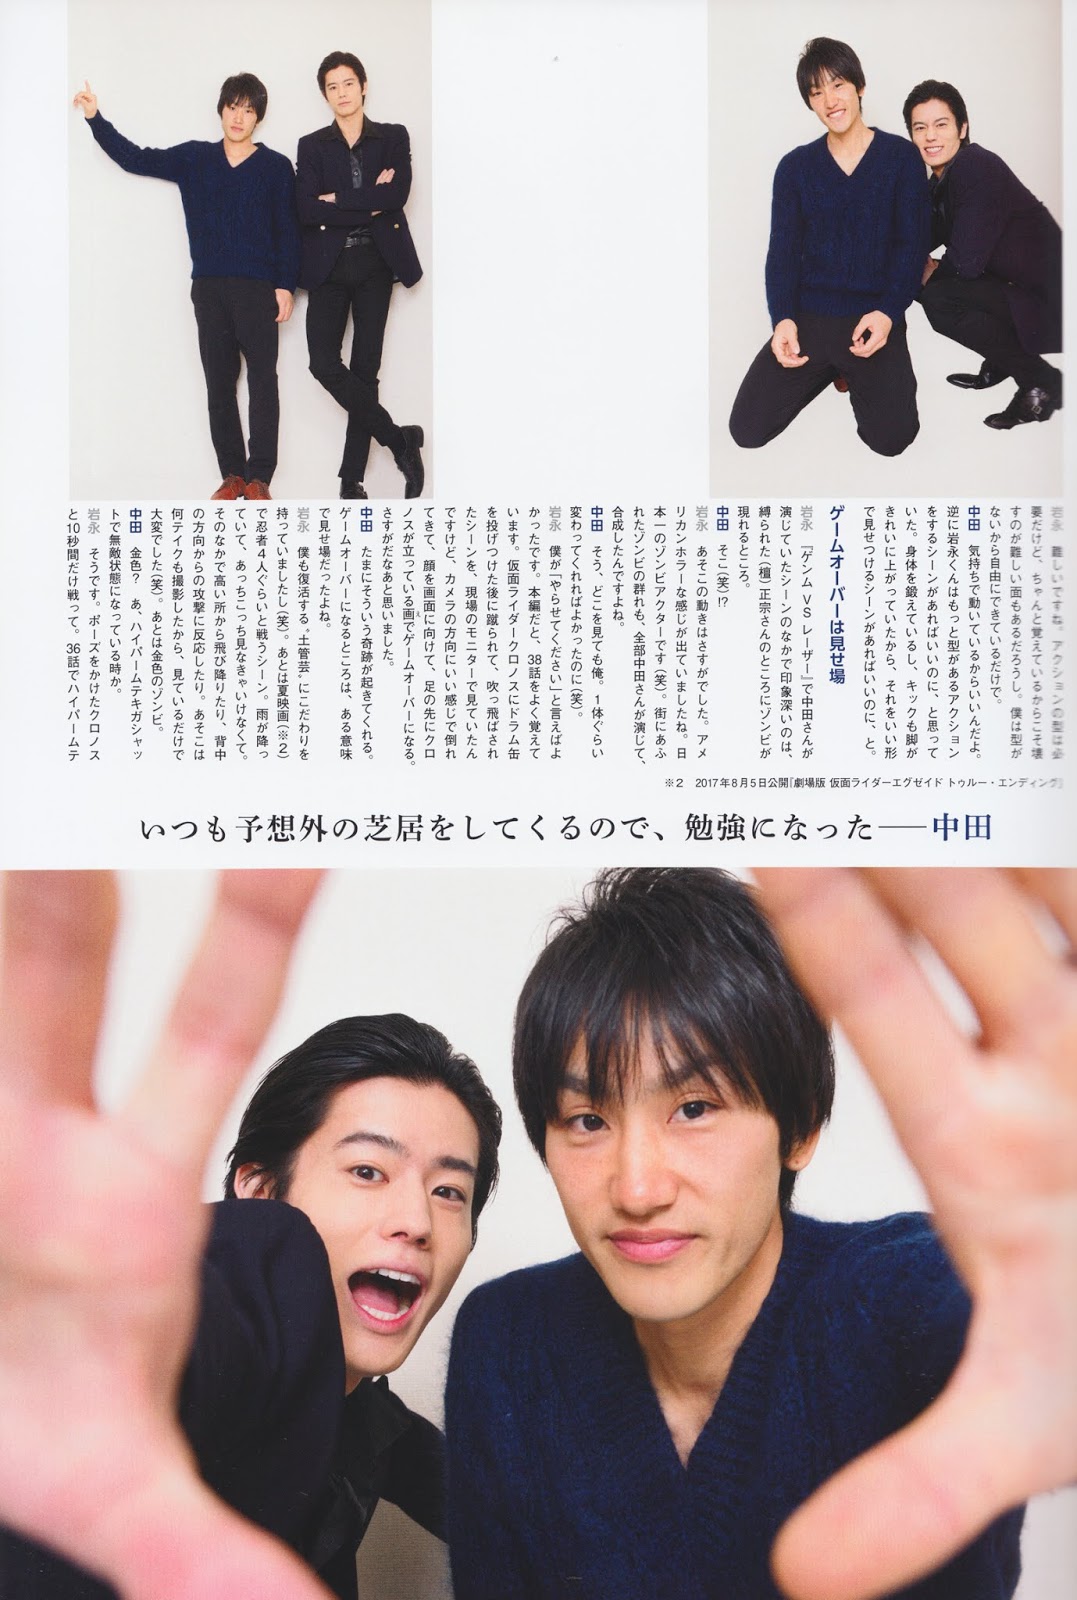 Scanned page of original interview with three photographs of Iwanaga Tetsuya and Nakata Yuji. In the first one they're posing together and Nakata is extending his right arm to the left, in the second one Nakata is kneeling on the floor and Iwanaga is squatting next to him, in the third one Iwanaga has his mouth open and they're both covering the camera lens with their hands.